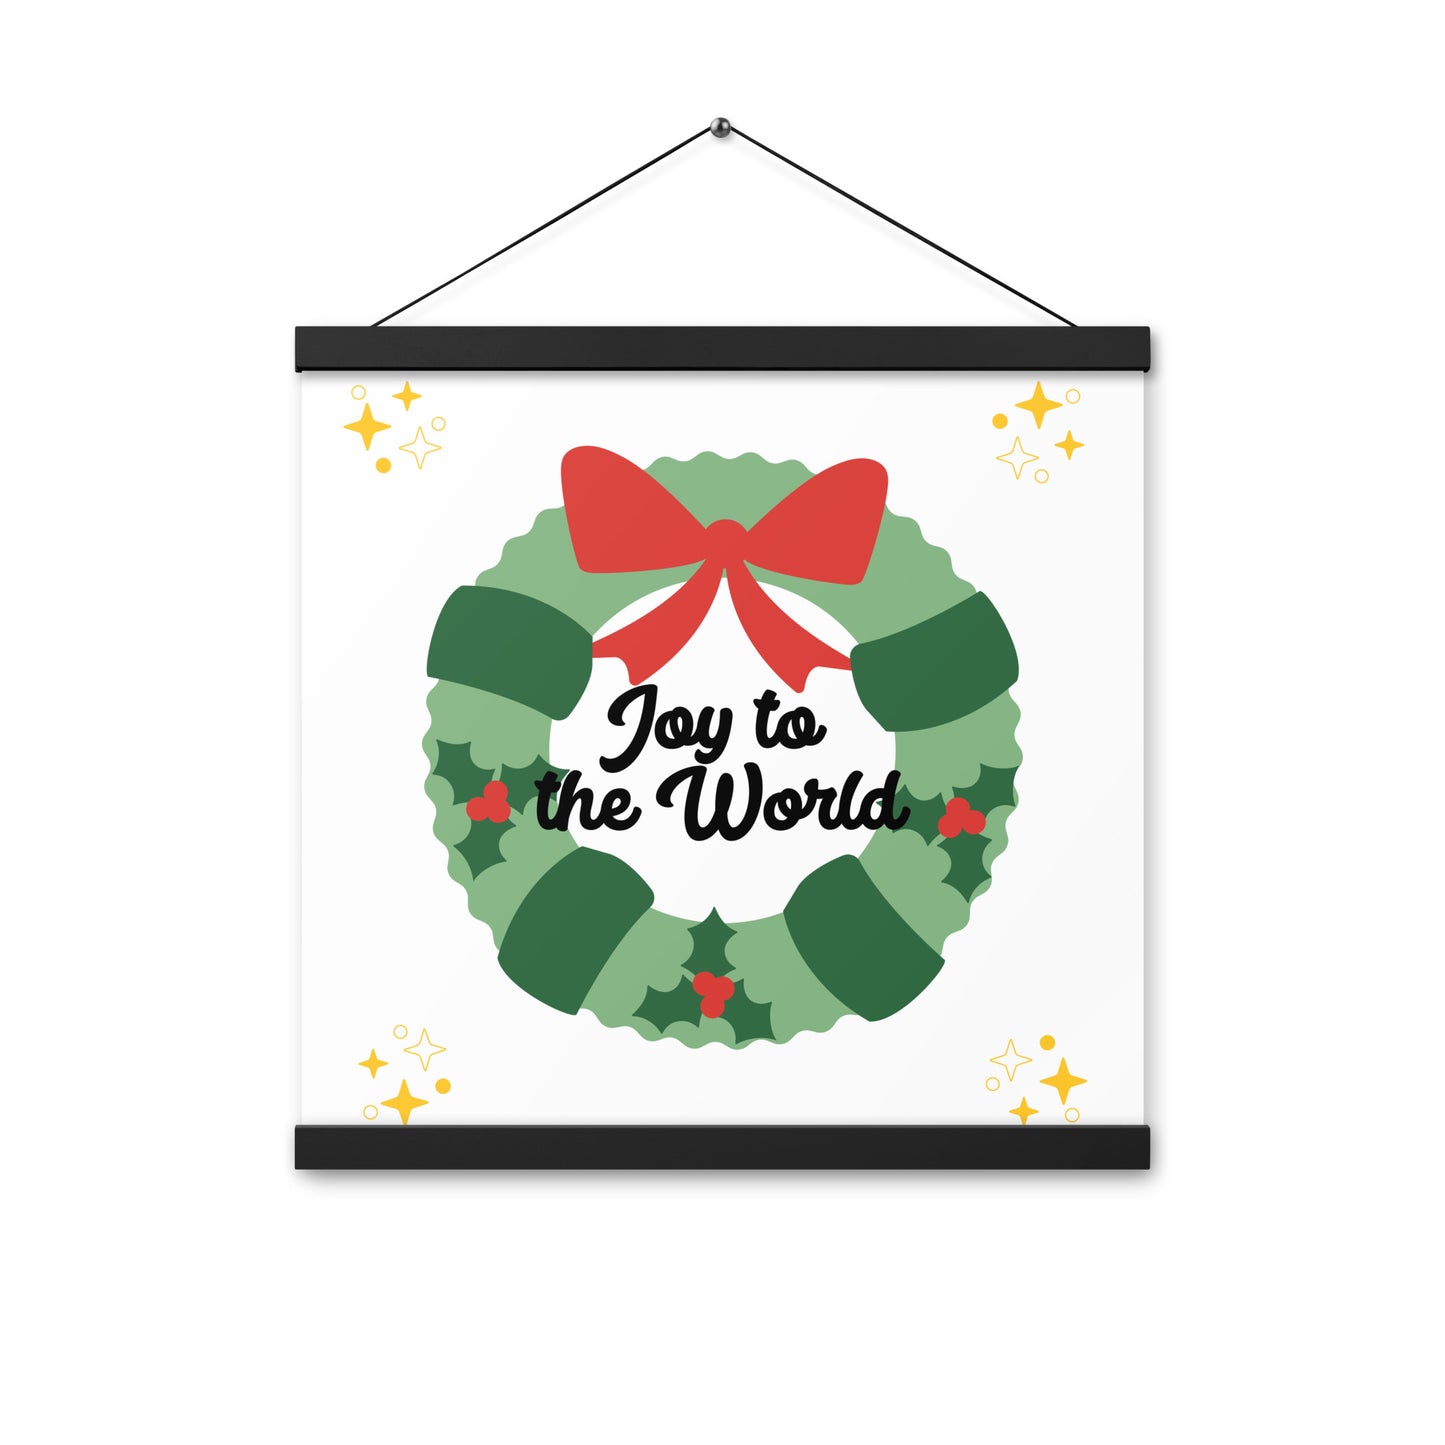 Joy to the World Hanging Poster